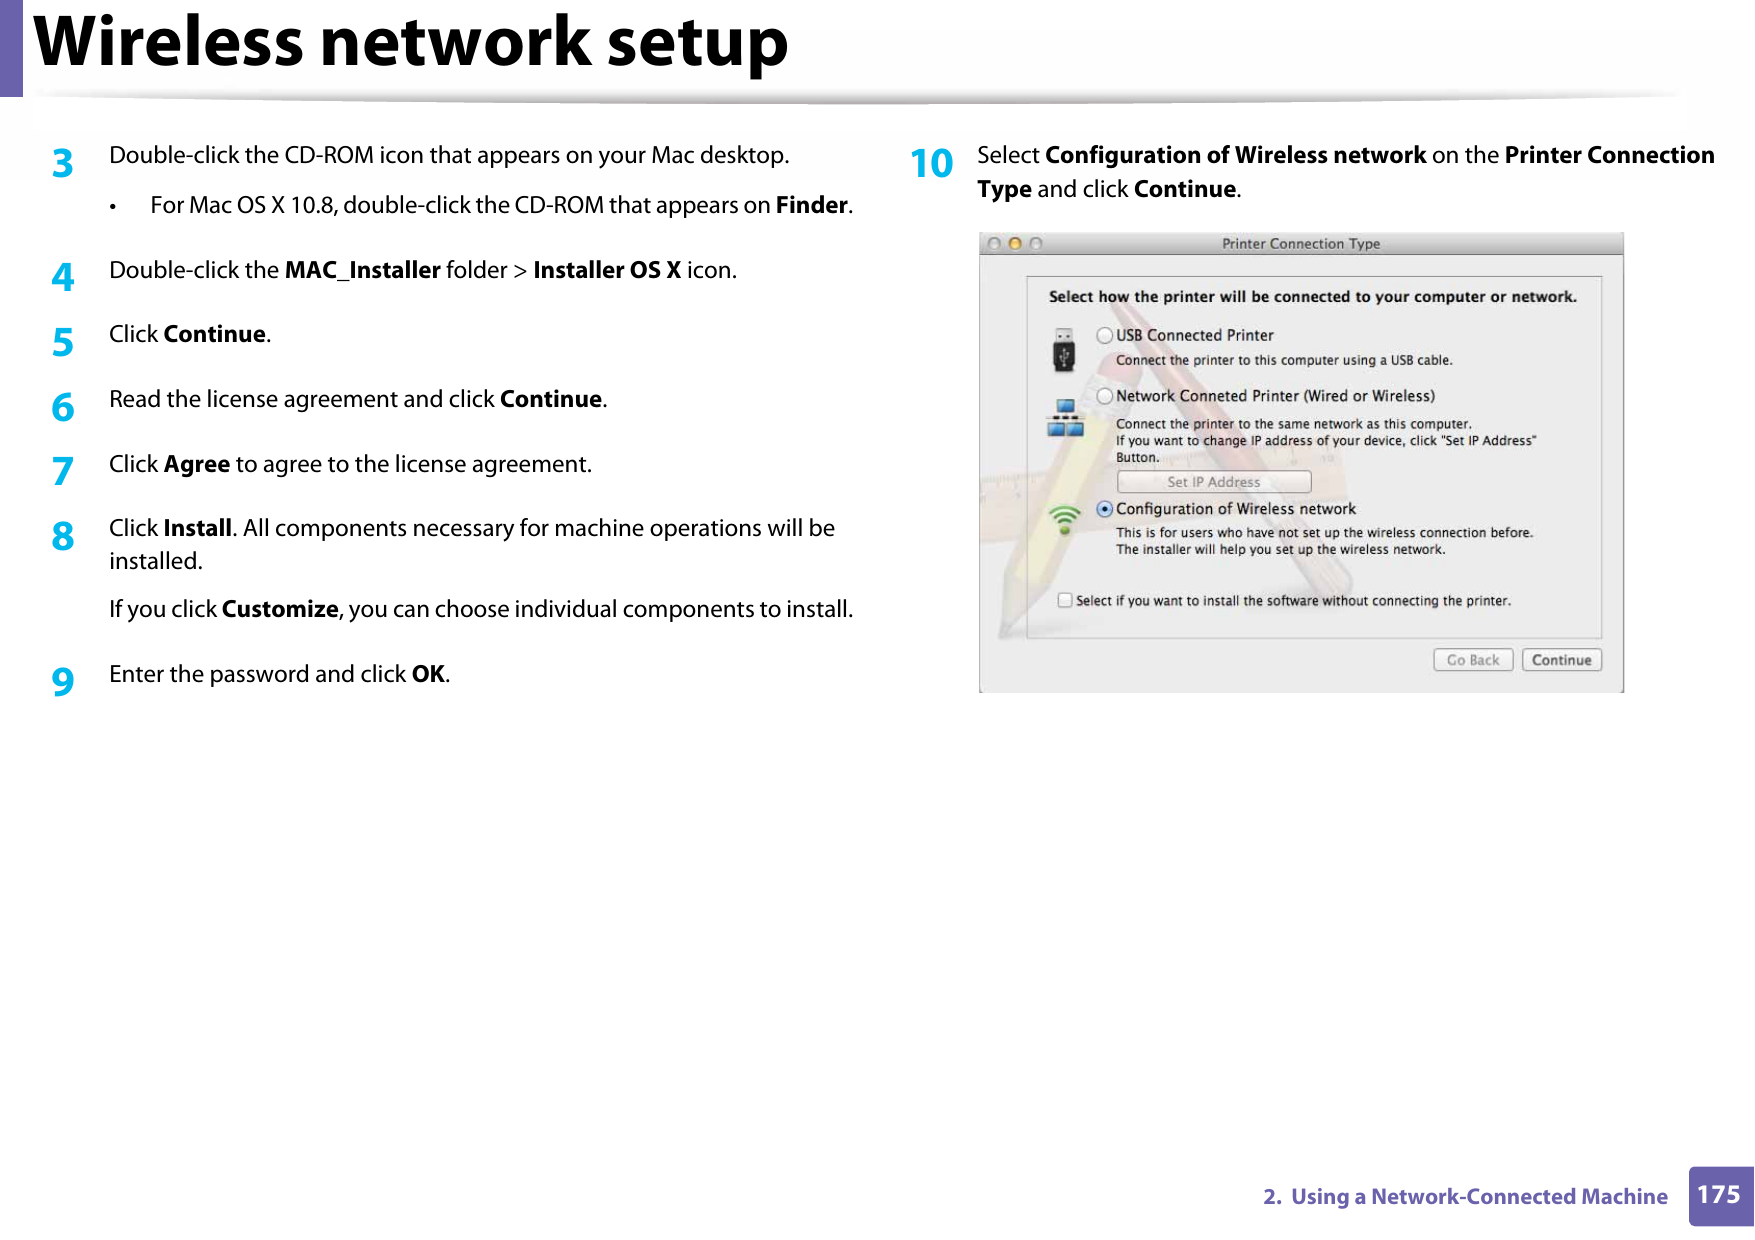 Wireless network setup1752.  Using a Network-Connected Machine3  Double-click the CD-ROM icon that appears on your Mac desktop.• For Mac OS X 10.8, double-click the CD-ROM that appears on Finder.4  Double-click the MAC_Installer folder &gt; Installer OS X icon.5  Click Continue.6  Read the license agreement and click Continue.7  Click Agree to agree to the license agreement.8  Click Install. All components necessary for machine operations will be installed.If you click Customize, you can choose individual components to install.9  Enter the password and click OK.10  Select Configuration of Wireless network on the Printer Connection Type and click Continue. 